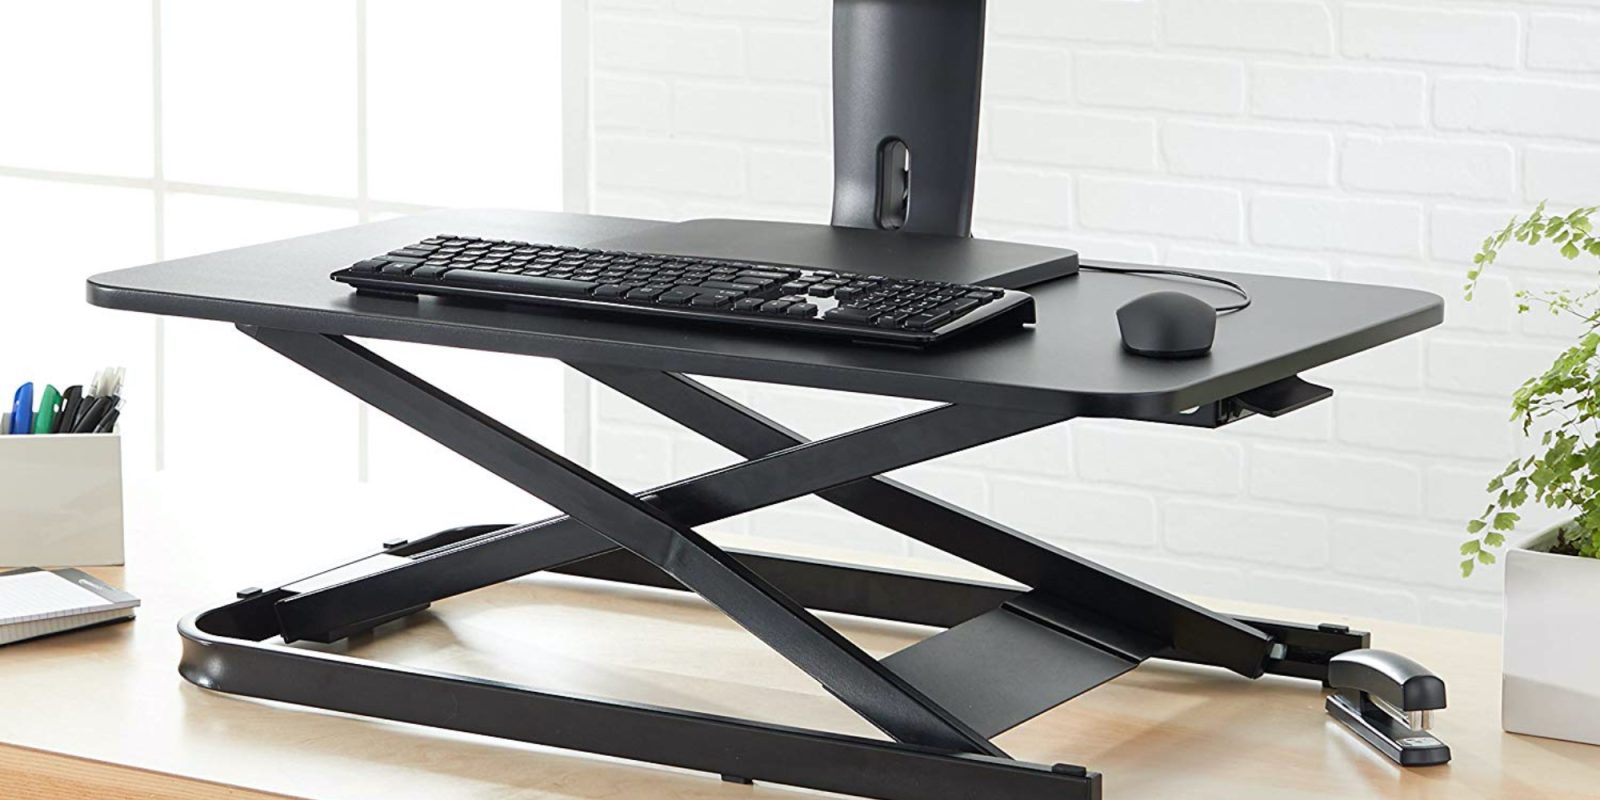 Build A Standing Desk With Amazonbasics 69 Converter At A New